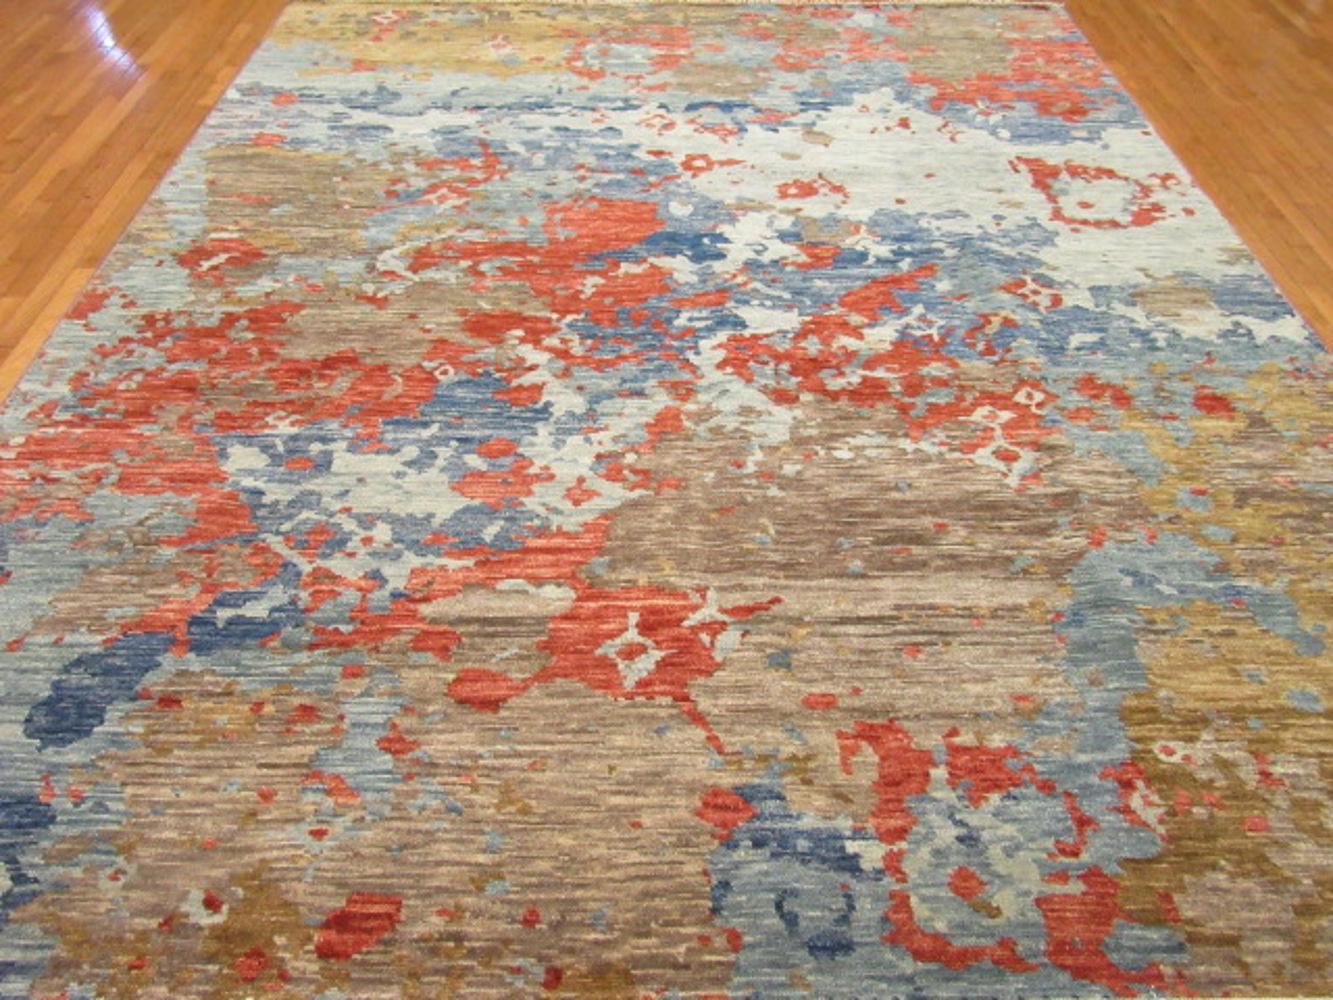 This is a large new handmade rug from India. It has a modern and contemporary design for those who desire something different. It is made with wool and stabile dyes. It measures 9' 3''x 12'.